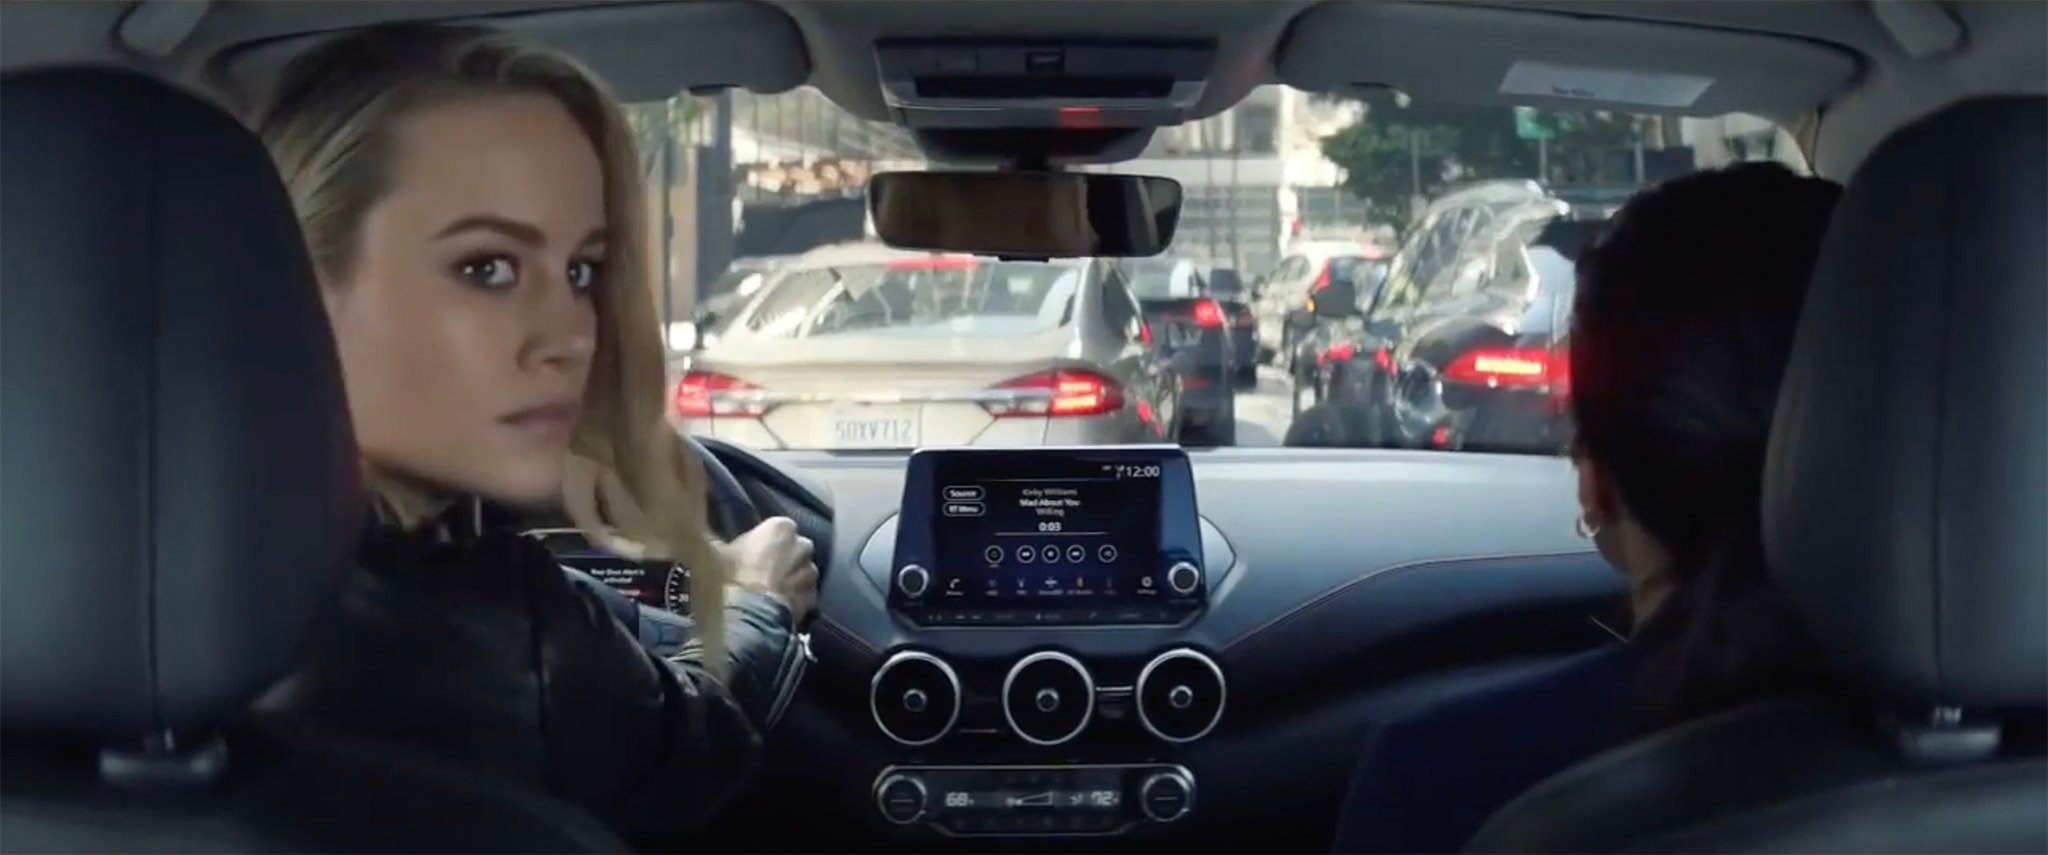 Brie Larson starred in a controversial feminist commercial for Nissan Sentra